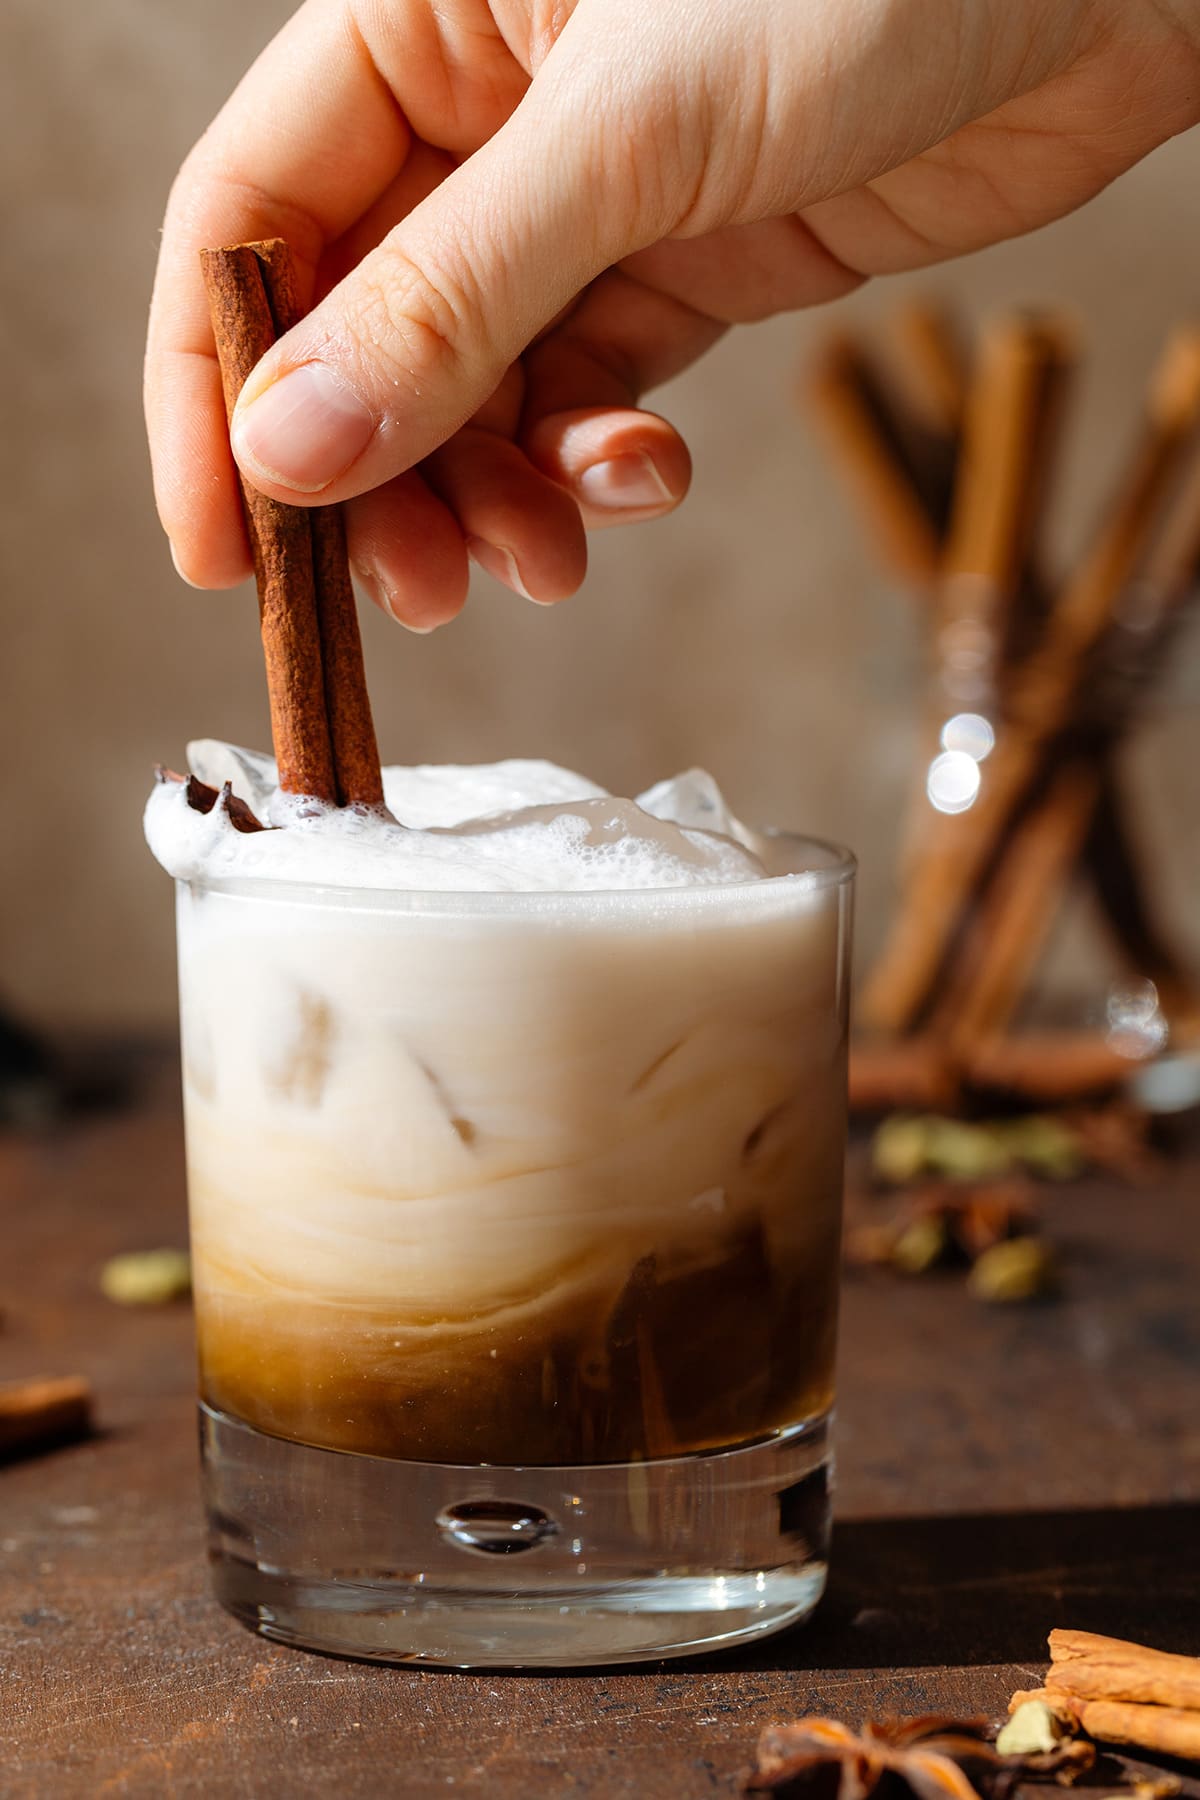 A hand mixing a white and brown-colored cocktail in a short glass together with a cinnamon stick.